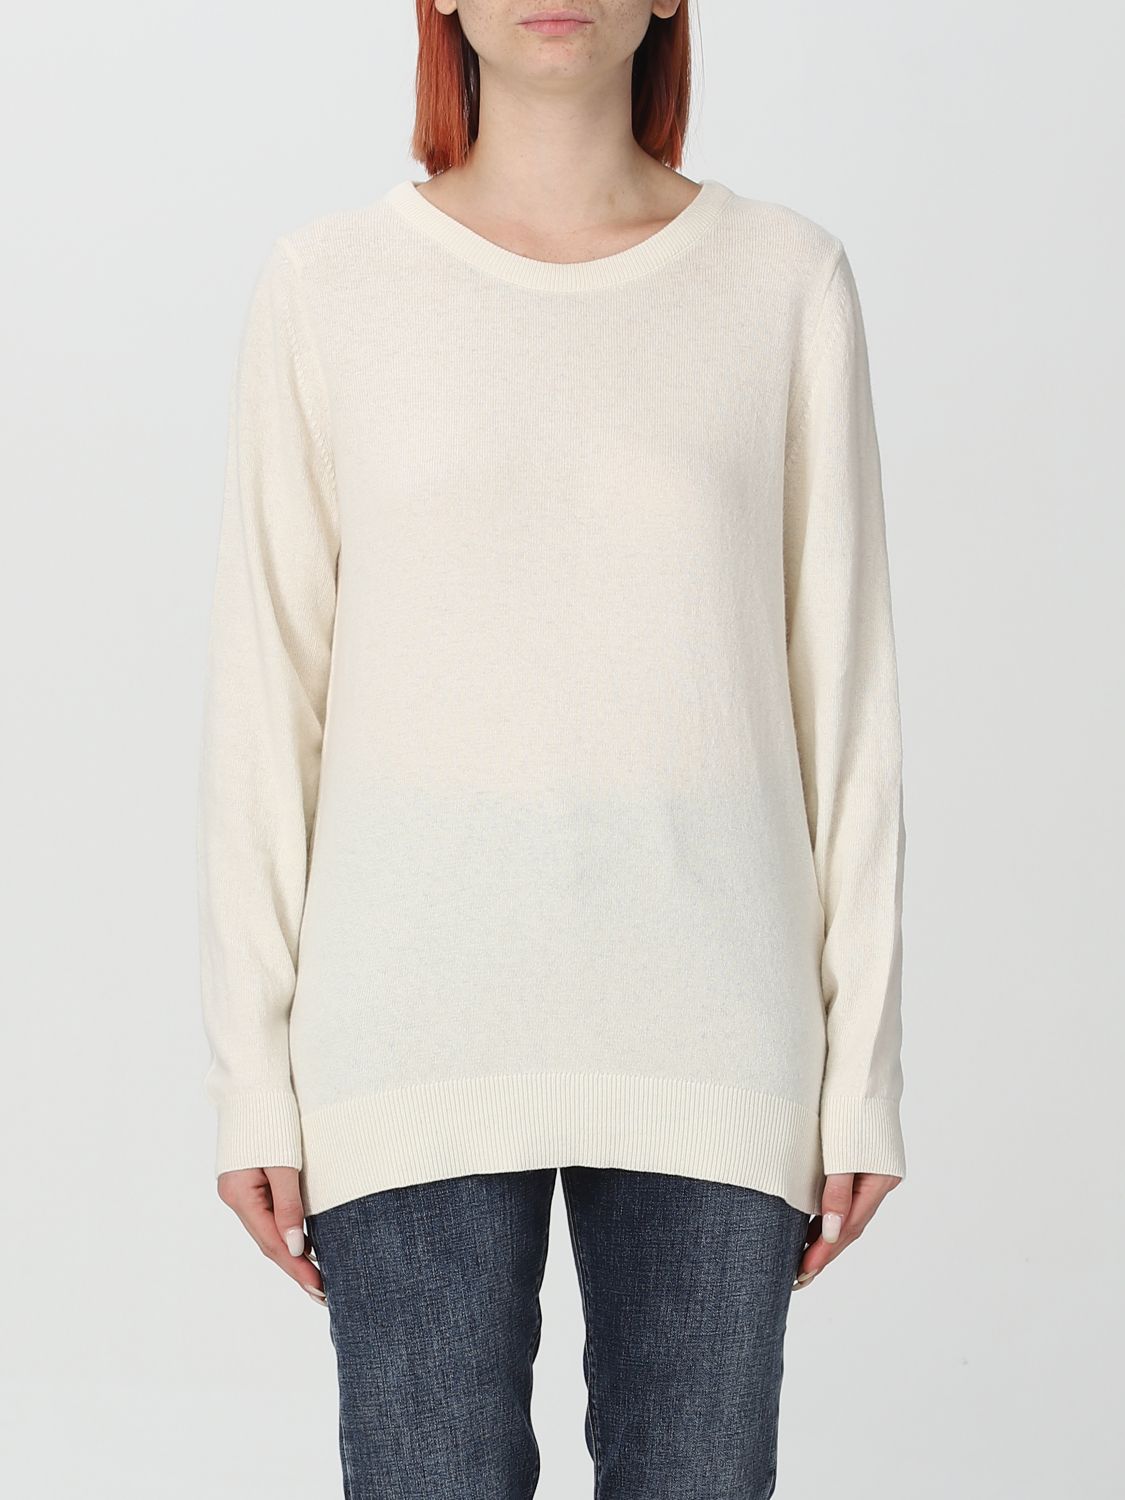 BARBOUR SWEATER BARBOUR WOMAN COLOR CREAM,E61583078